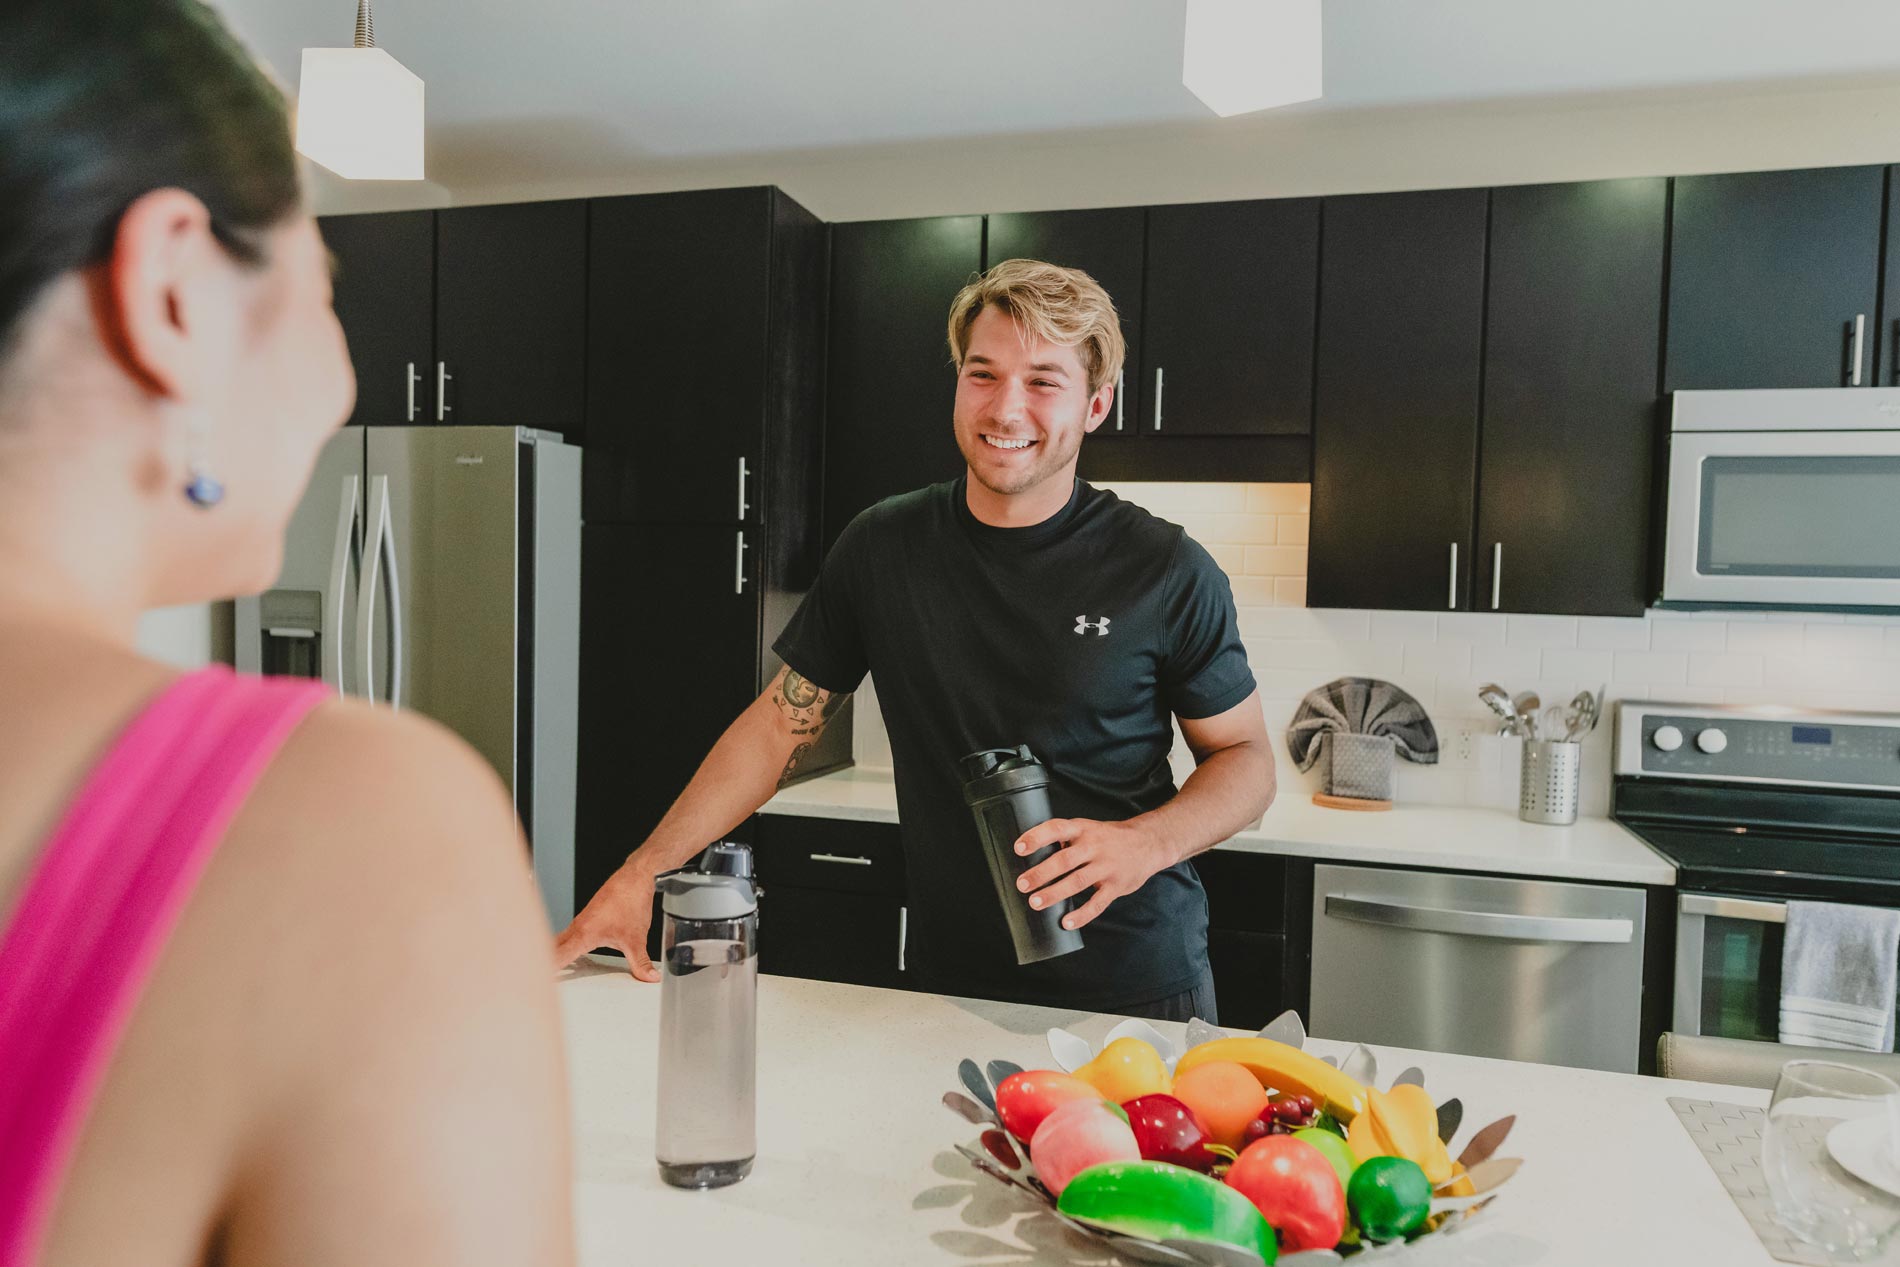 Channel Mission Bay man and woman taking in apartment kitchen